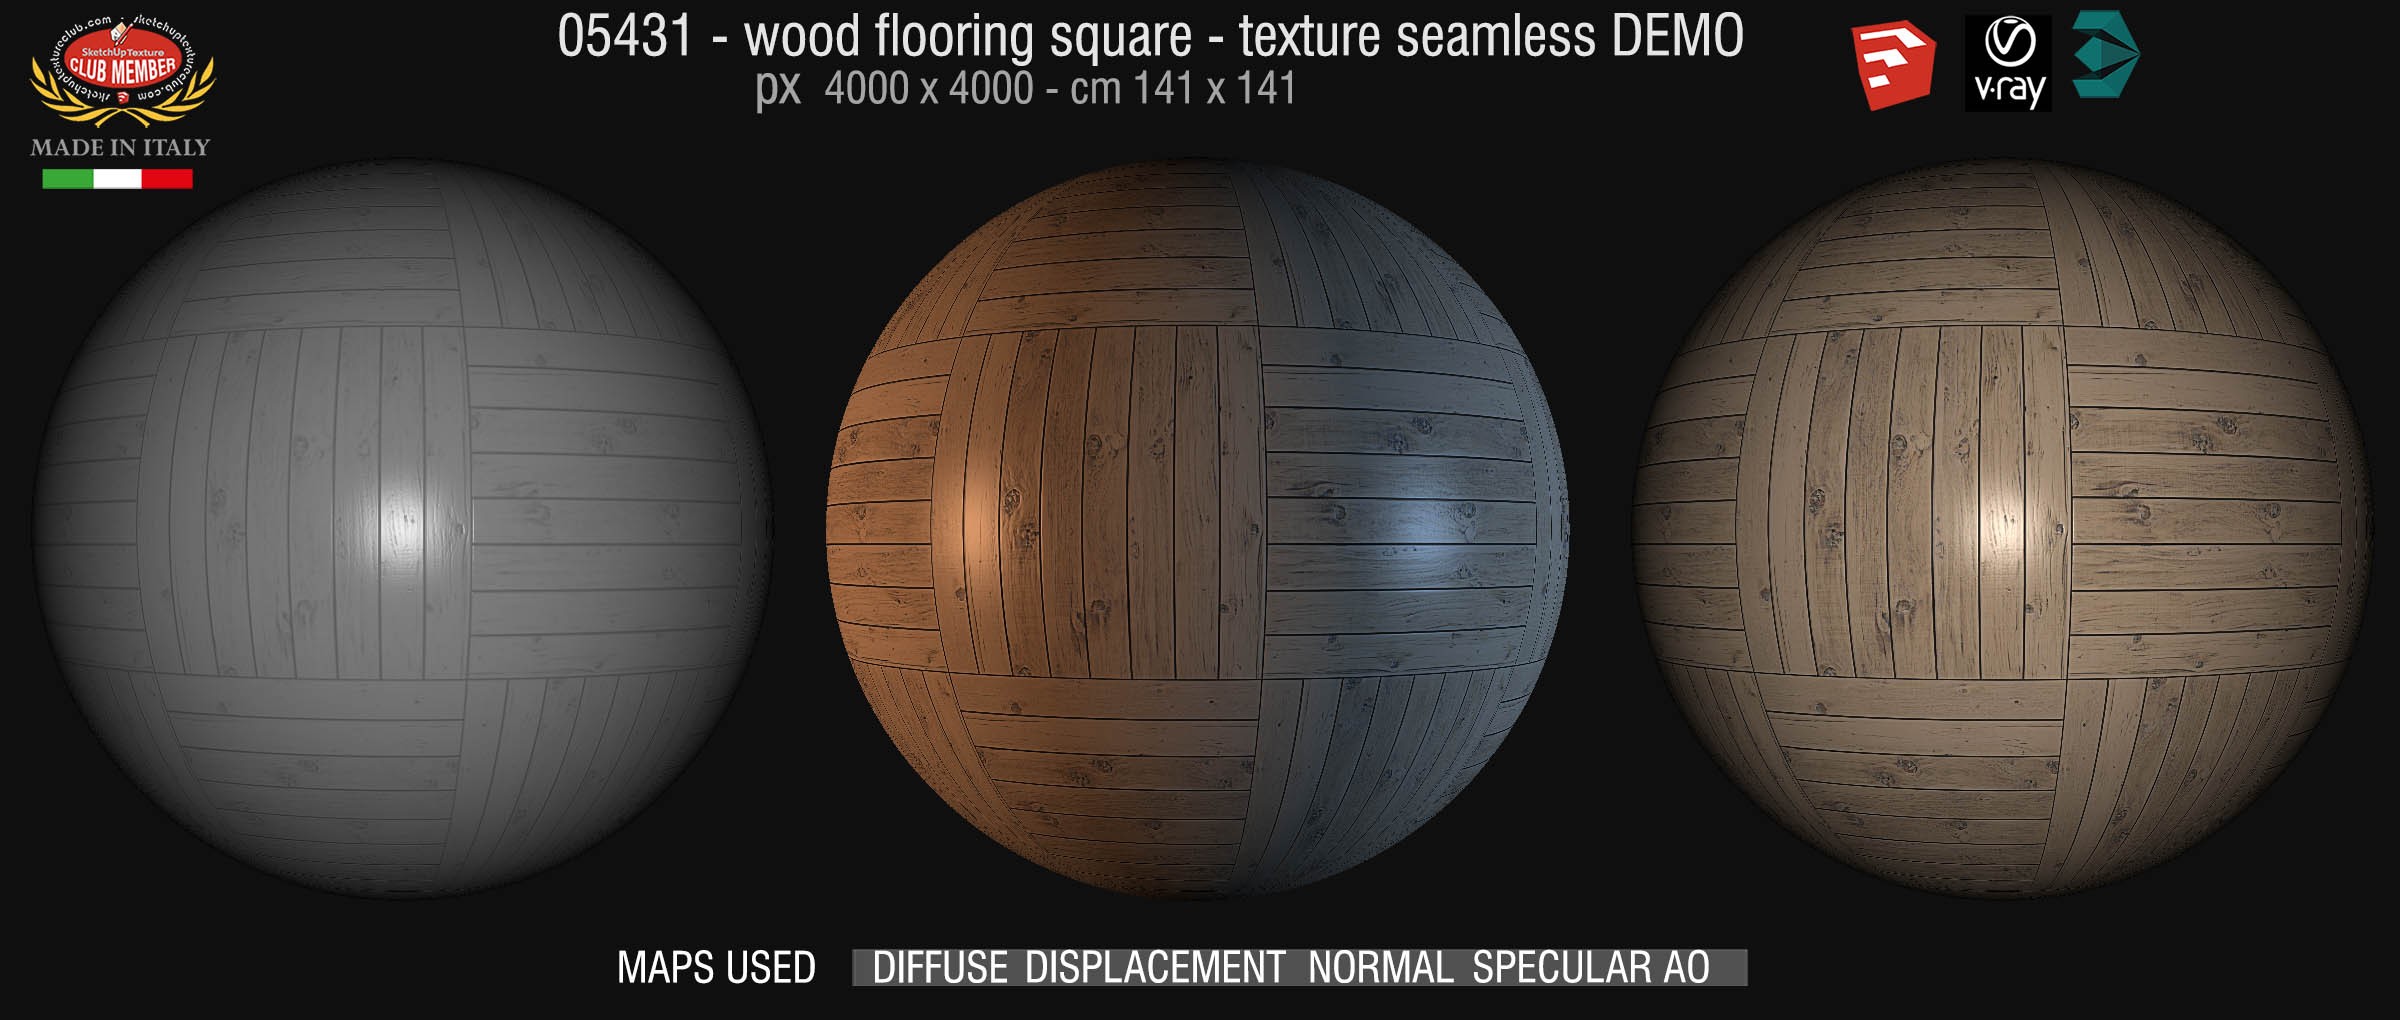 05431 Wood flooring square texture seamless + maps DEMO